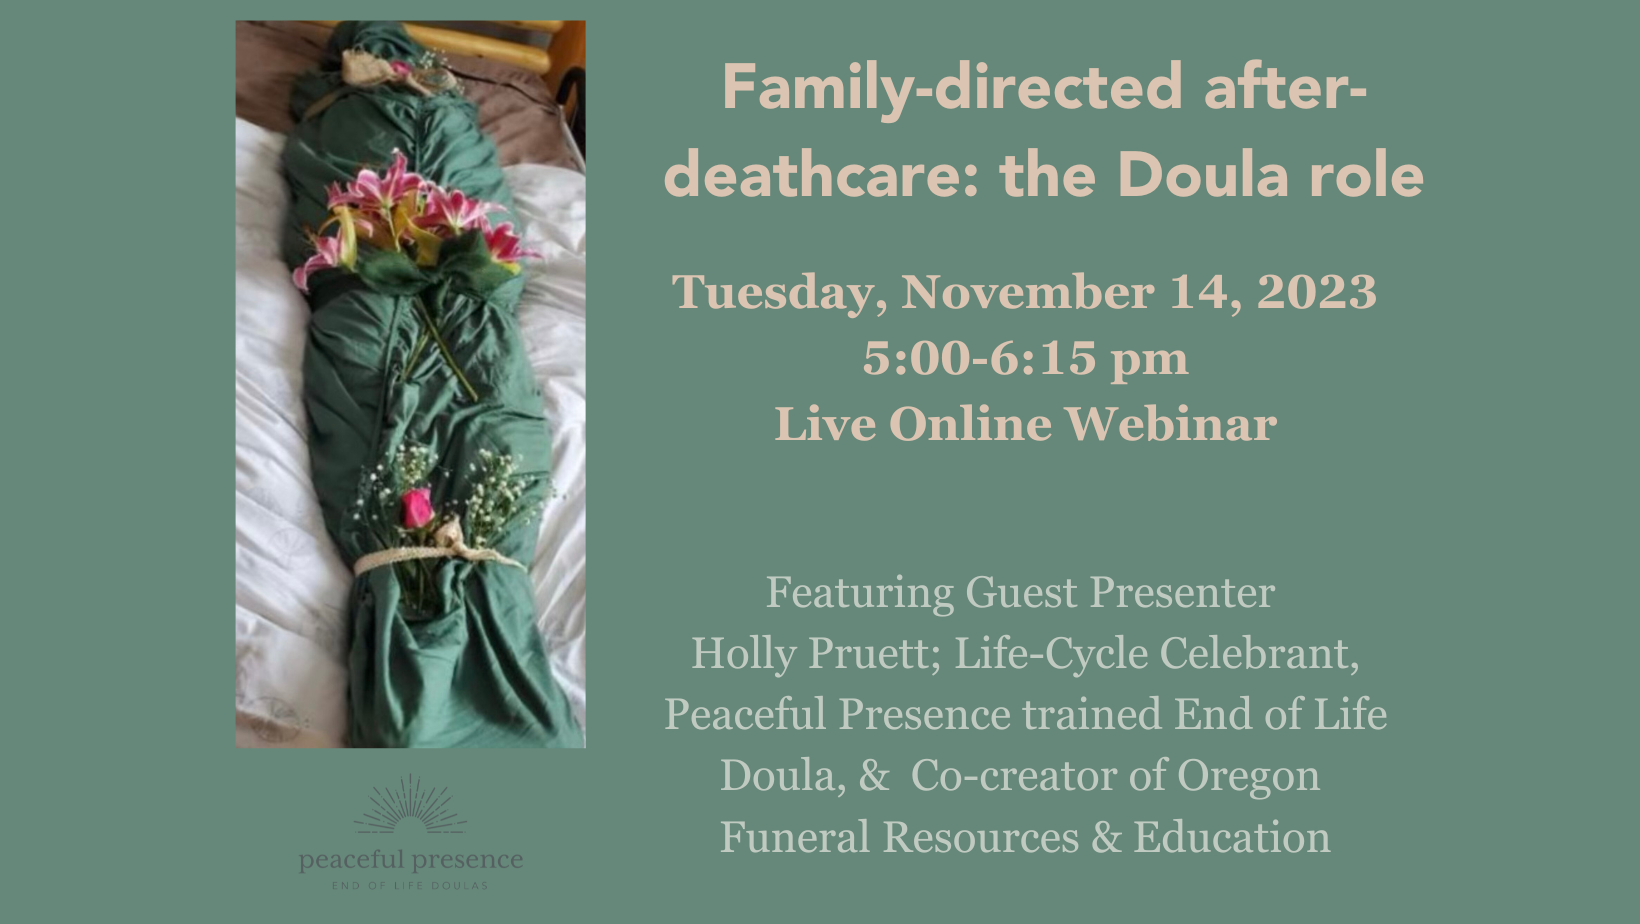 We offer End of Life Planning, Doula care and Employee Wellbeing